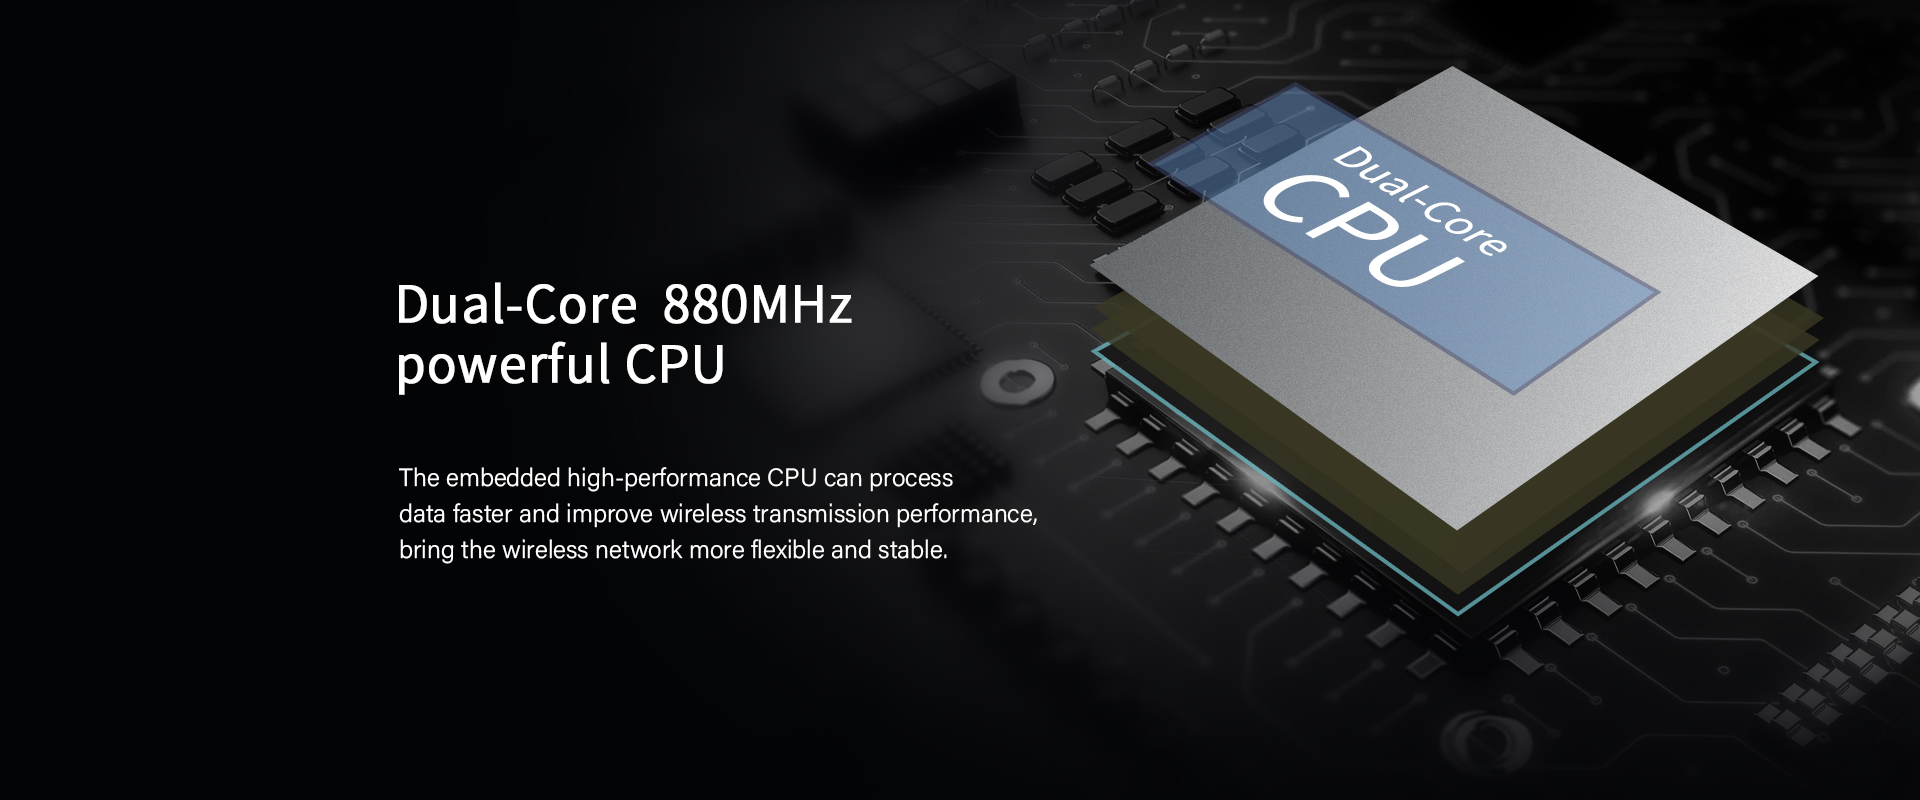  Dual-Core CPU for Powerful Processing  